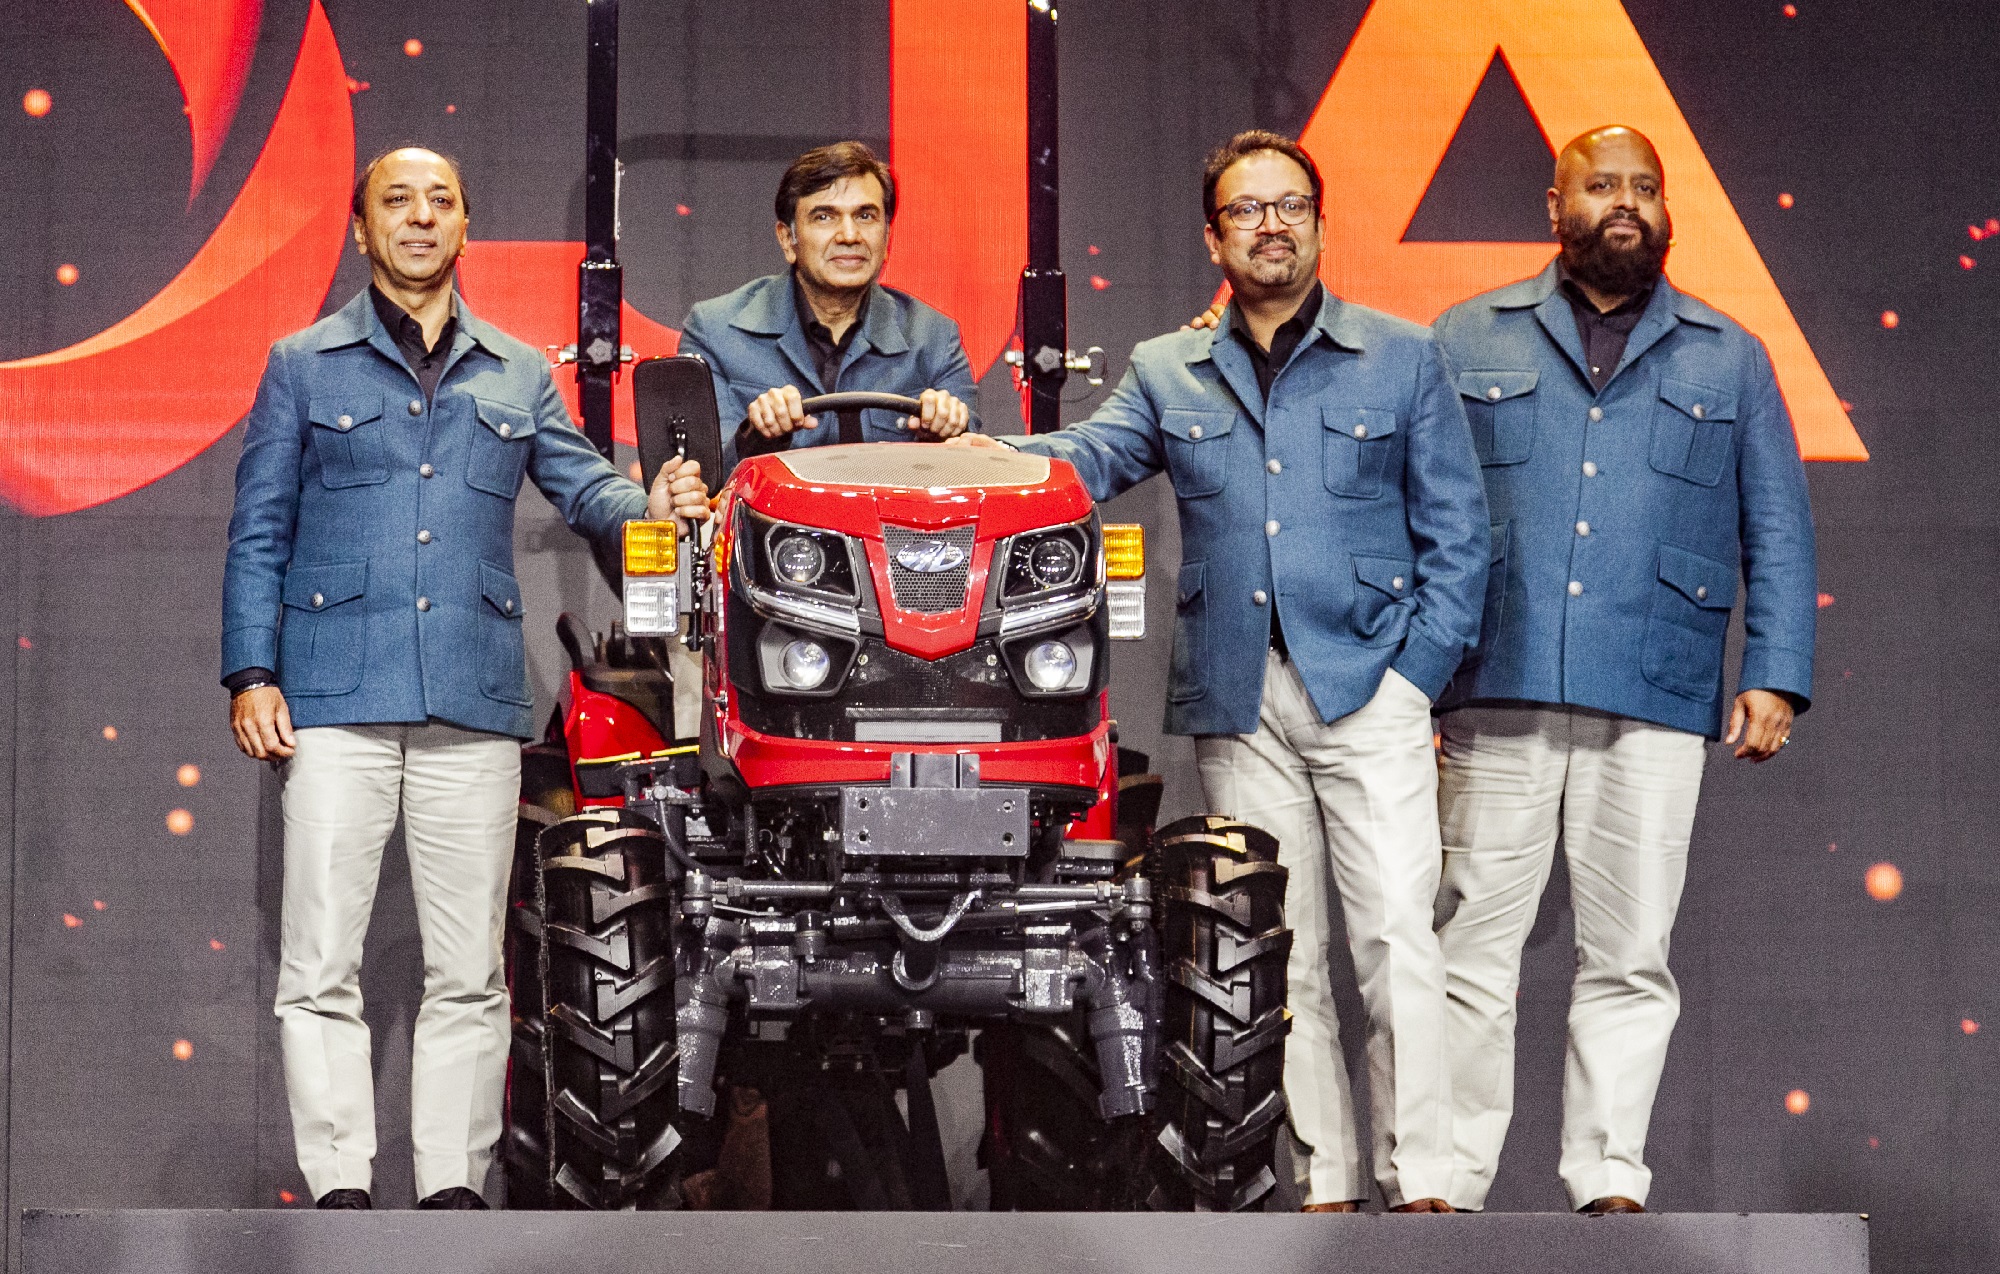 L – R: Mr. Hemant Sikka, President, Farm Equipment Sector, M&M Ltd, Mr. Rajesh Jejurikar, ED & CEO, Auto and Farm Sector, M&M Ltd, Mr. Pratap Bose, Chief Design Officer, M&M Ltd and Mr. Vikram Wagh, CEO, Farm Division, M&M Ltd at the launch of the most technologically advanced line of tractor platform – the Mahindra OJA at Futurescape, an event held today in Cape Town, South Africa.